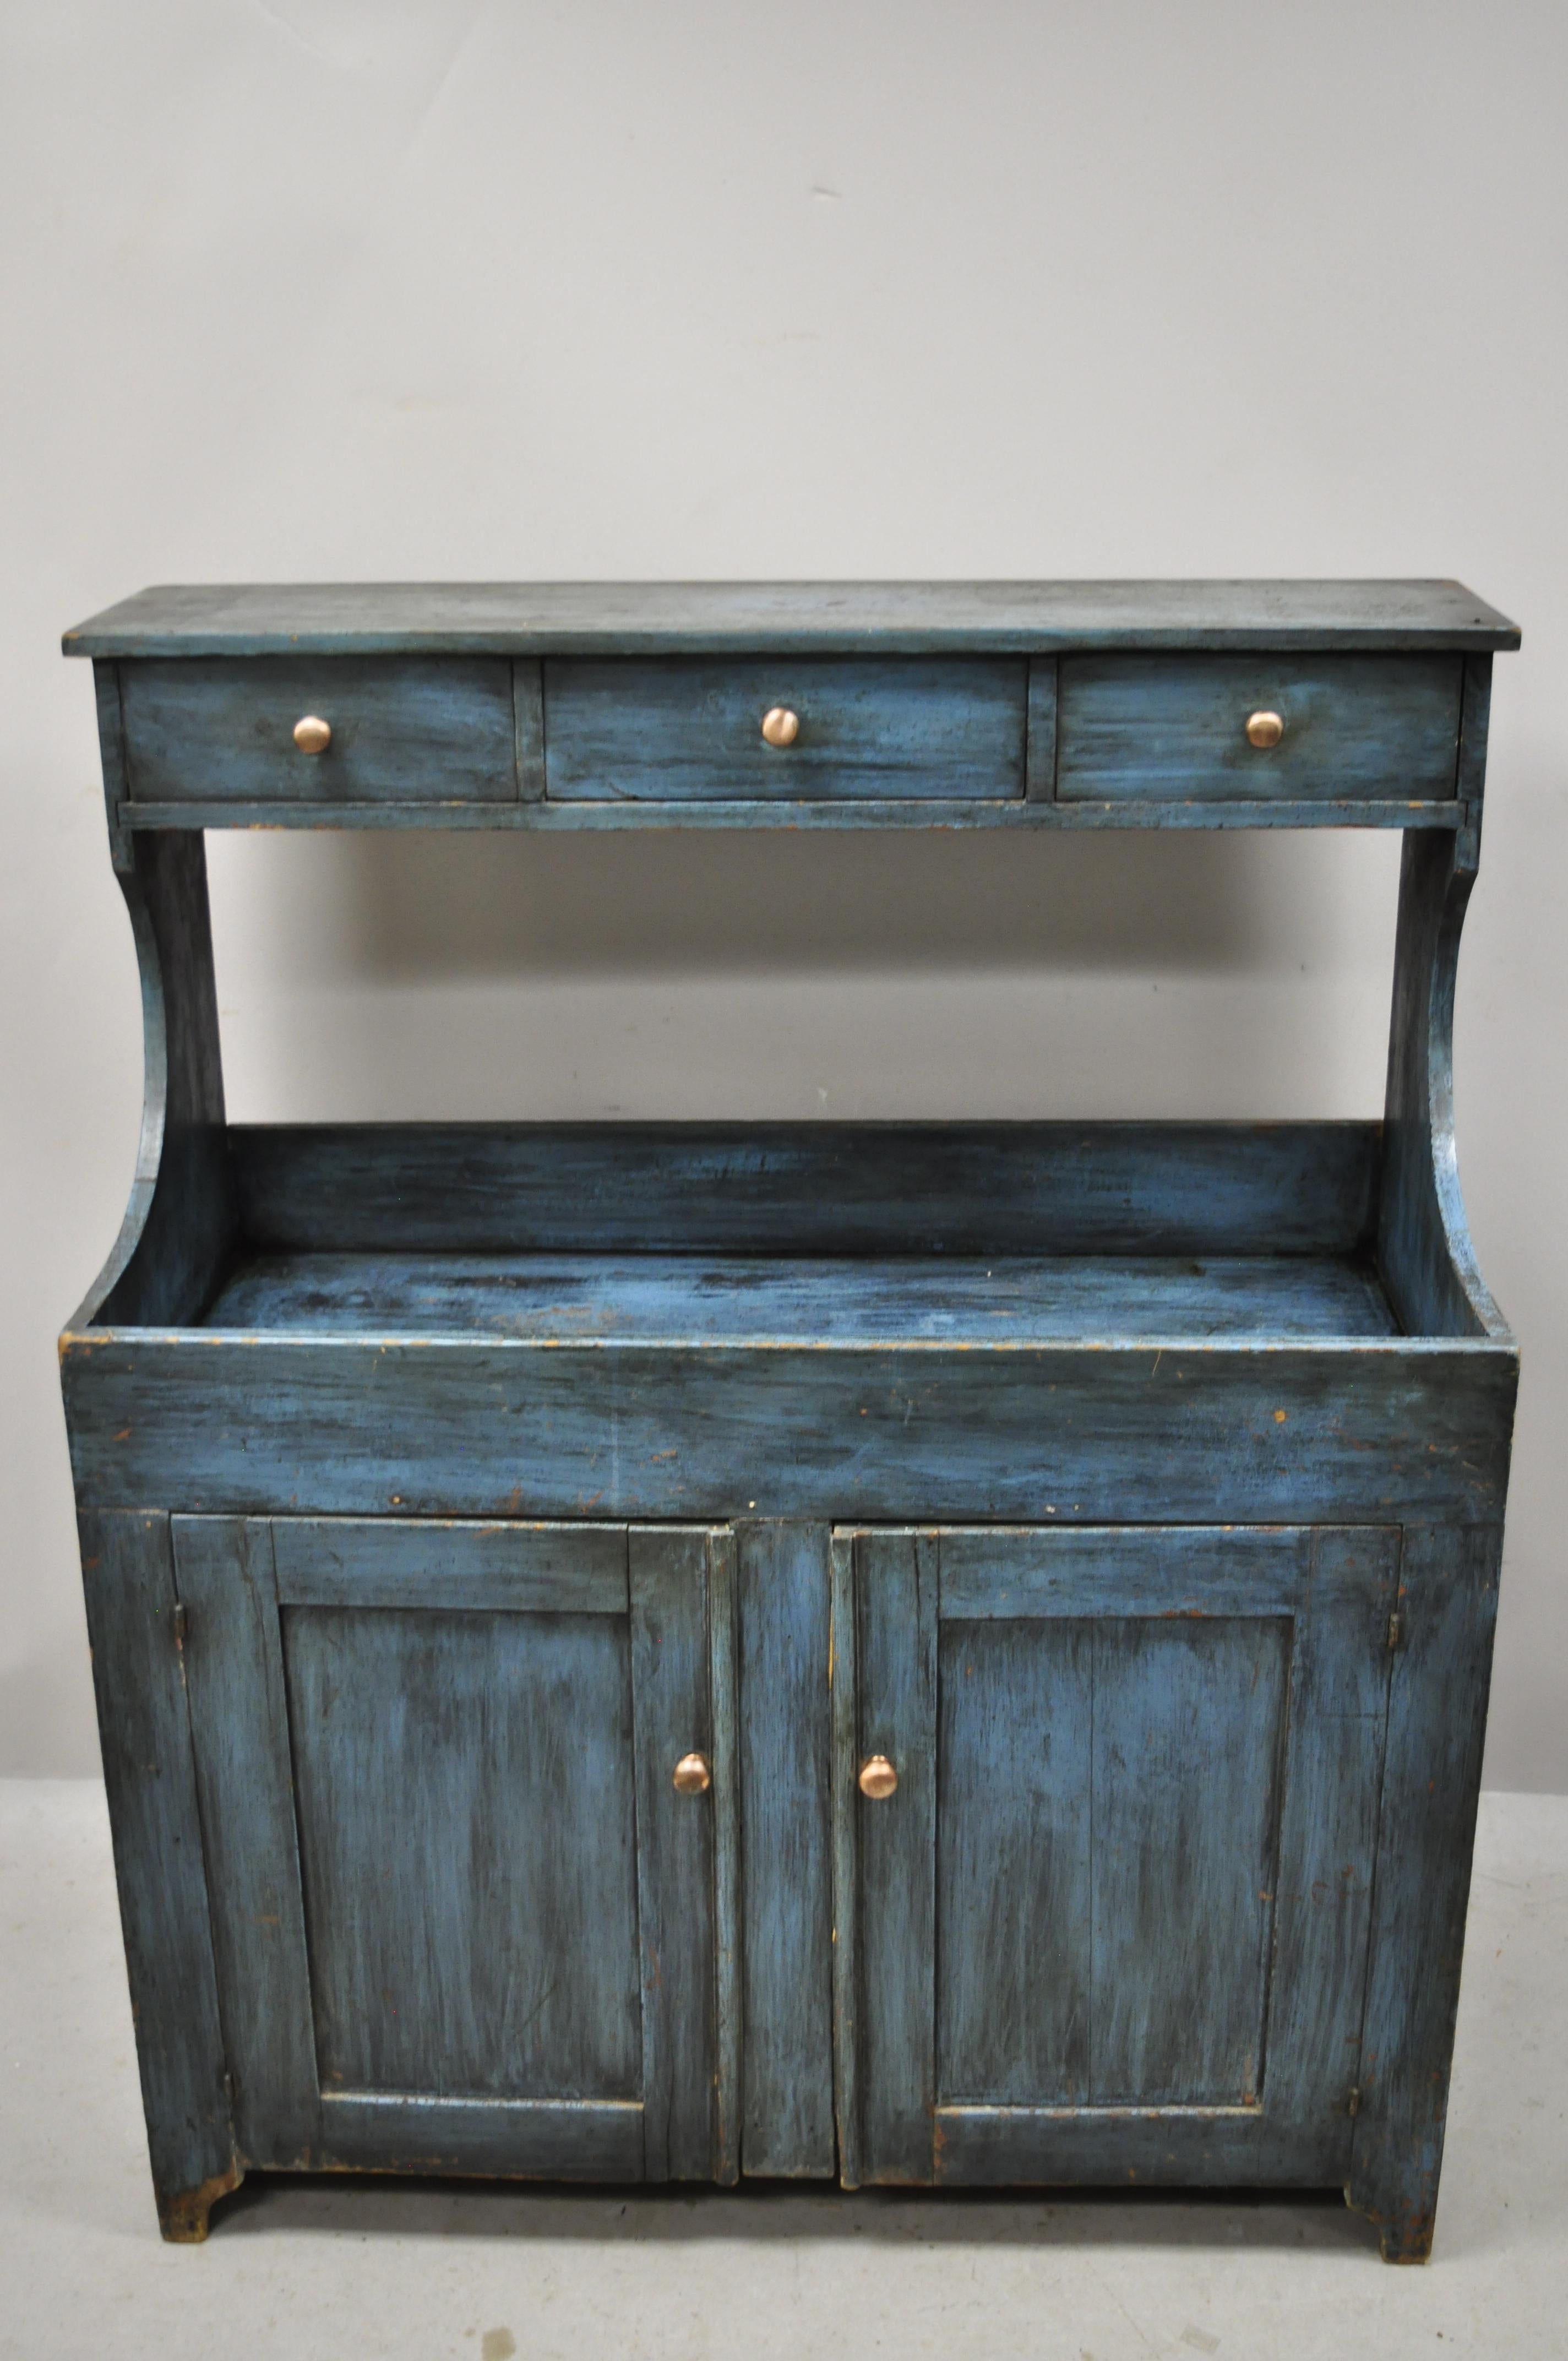 19th century antique primitive country blue distress painted stepback hutch cupboard cabinet. Item features 3 pin and cove constructed drawers, 2 swing doors, very nice antique item, quality American craftsmanship, great style and form.